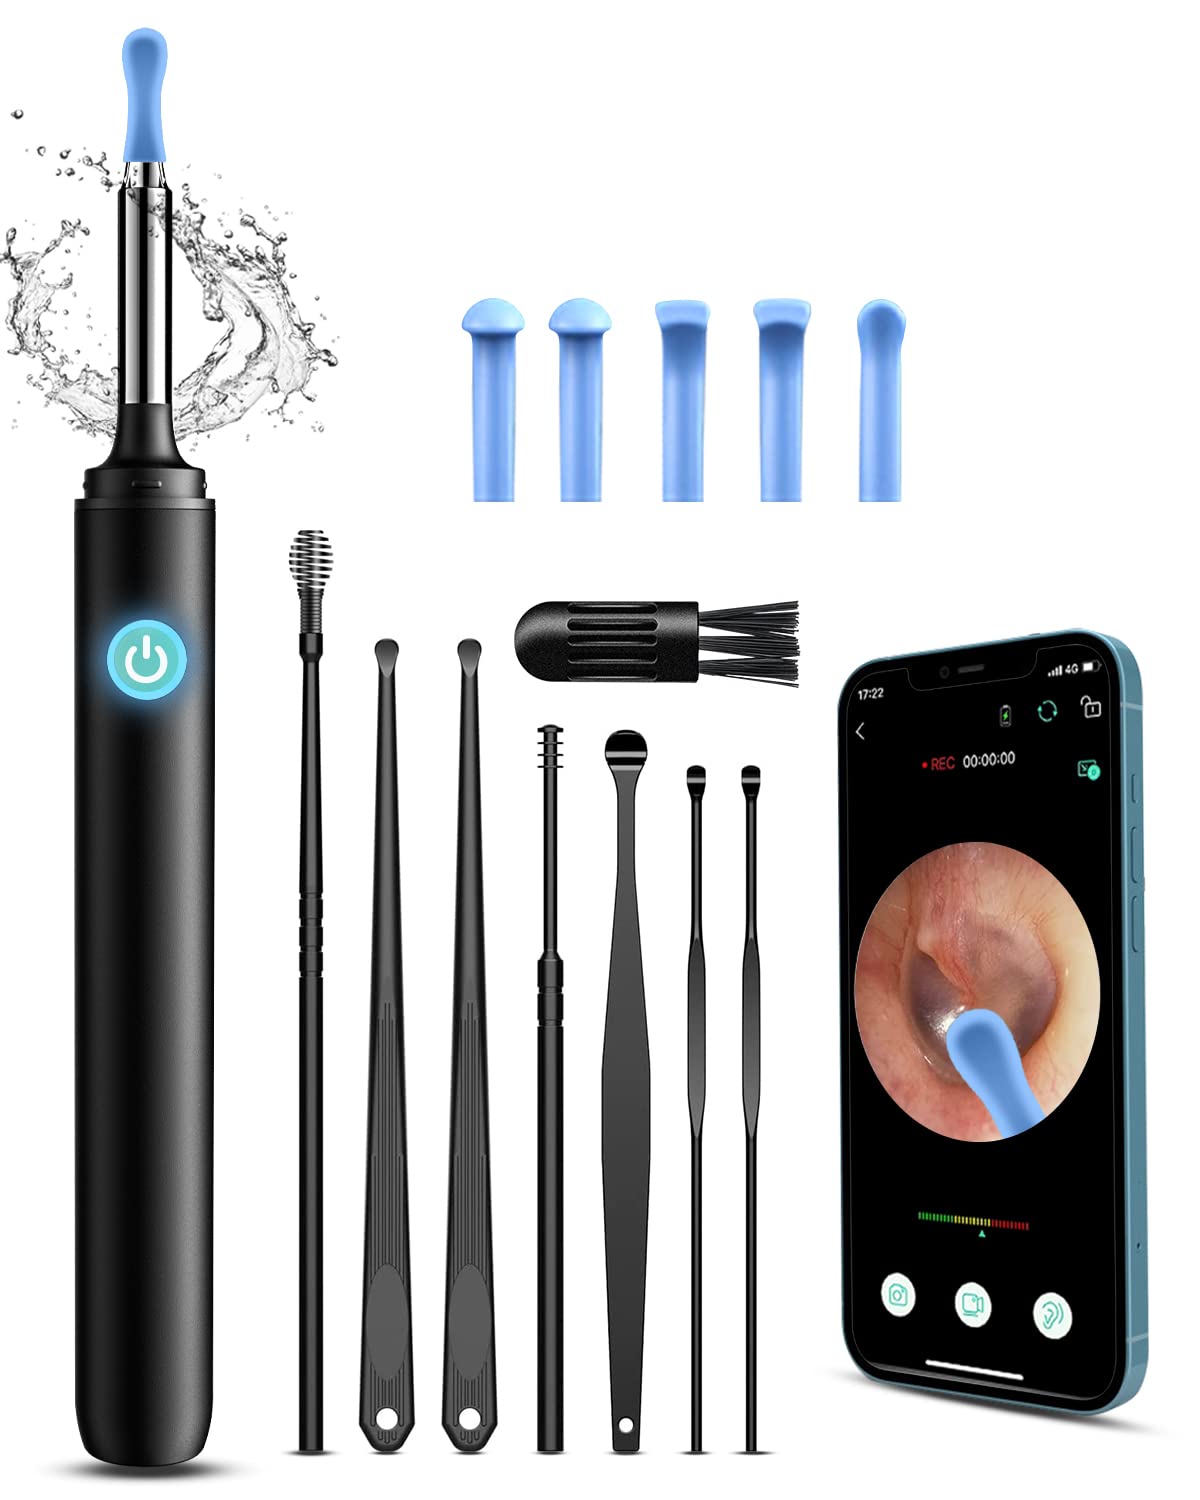 Ear Wax Removal kit, Ear Cleaner with Camera and Light,Earwax Remover Kit with 1080P Wi-Fi 8 Pcs Waterproof wush Ear Cleaner kit with 6 LED Lights for Android Phones